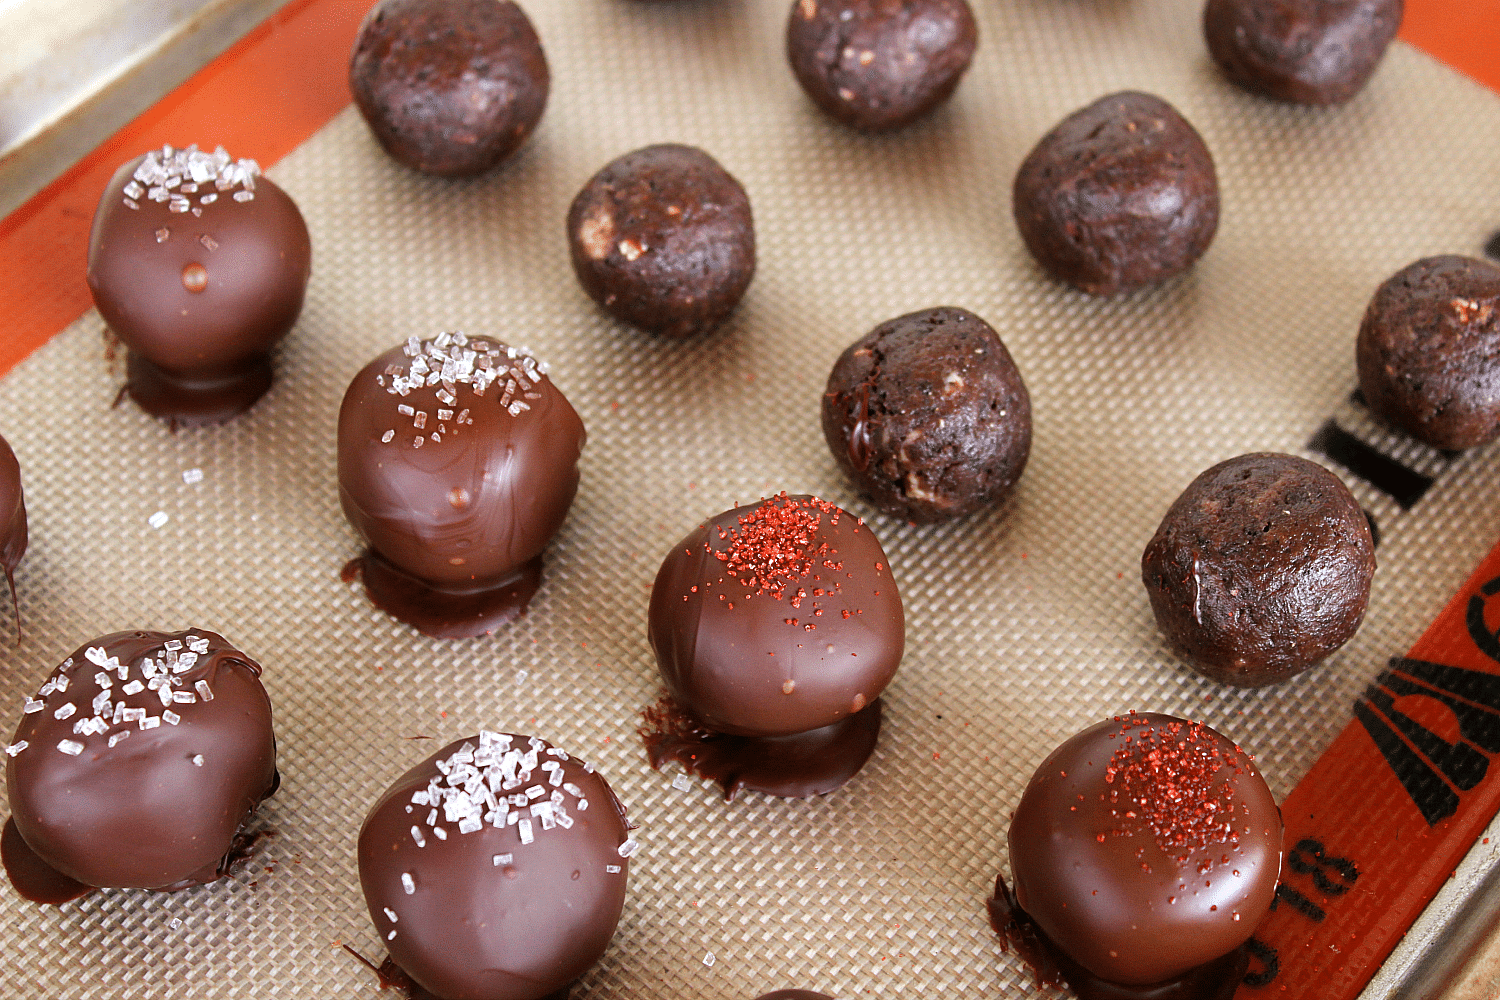 Place finished truffles on the lined cookie sheet and sprinkle immediately with sprinkles or cookie crumbs before they cool.